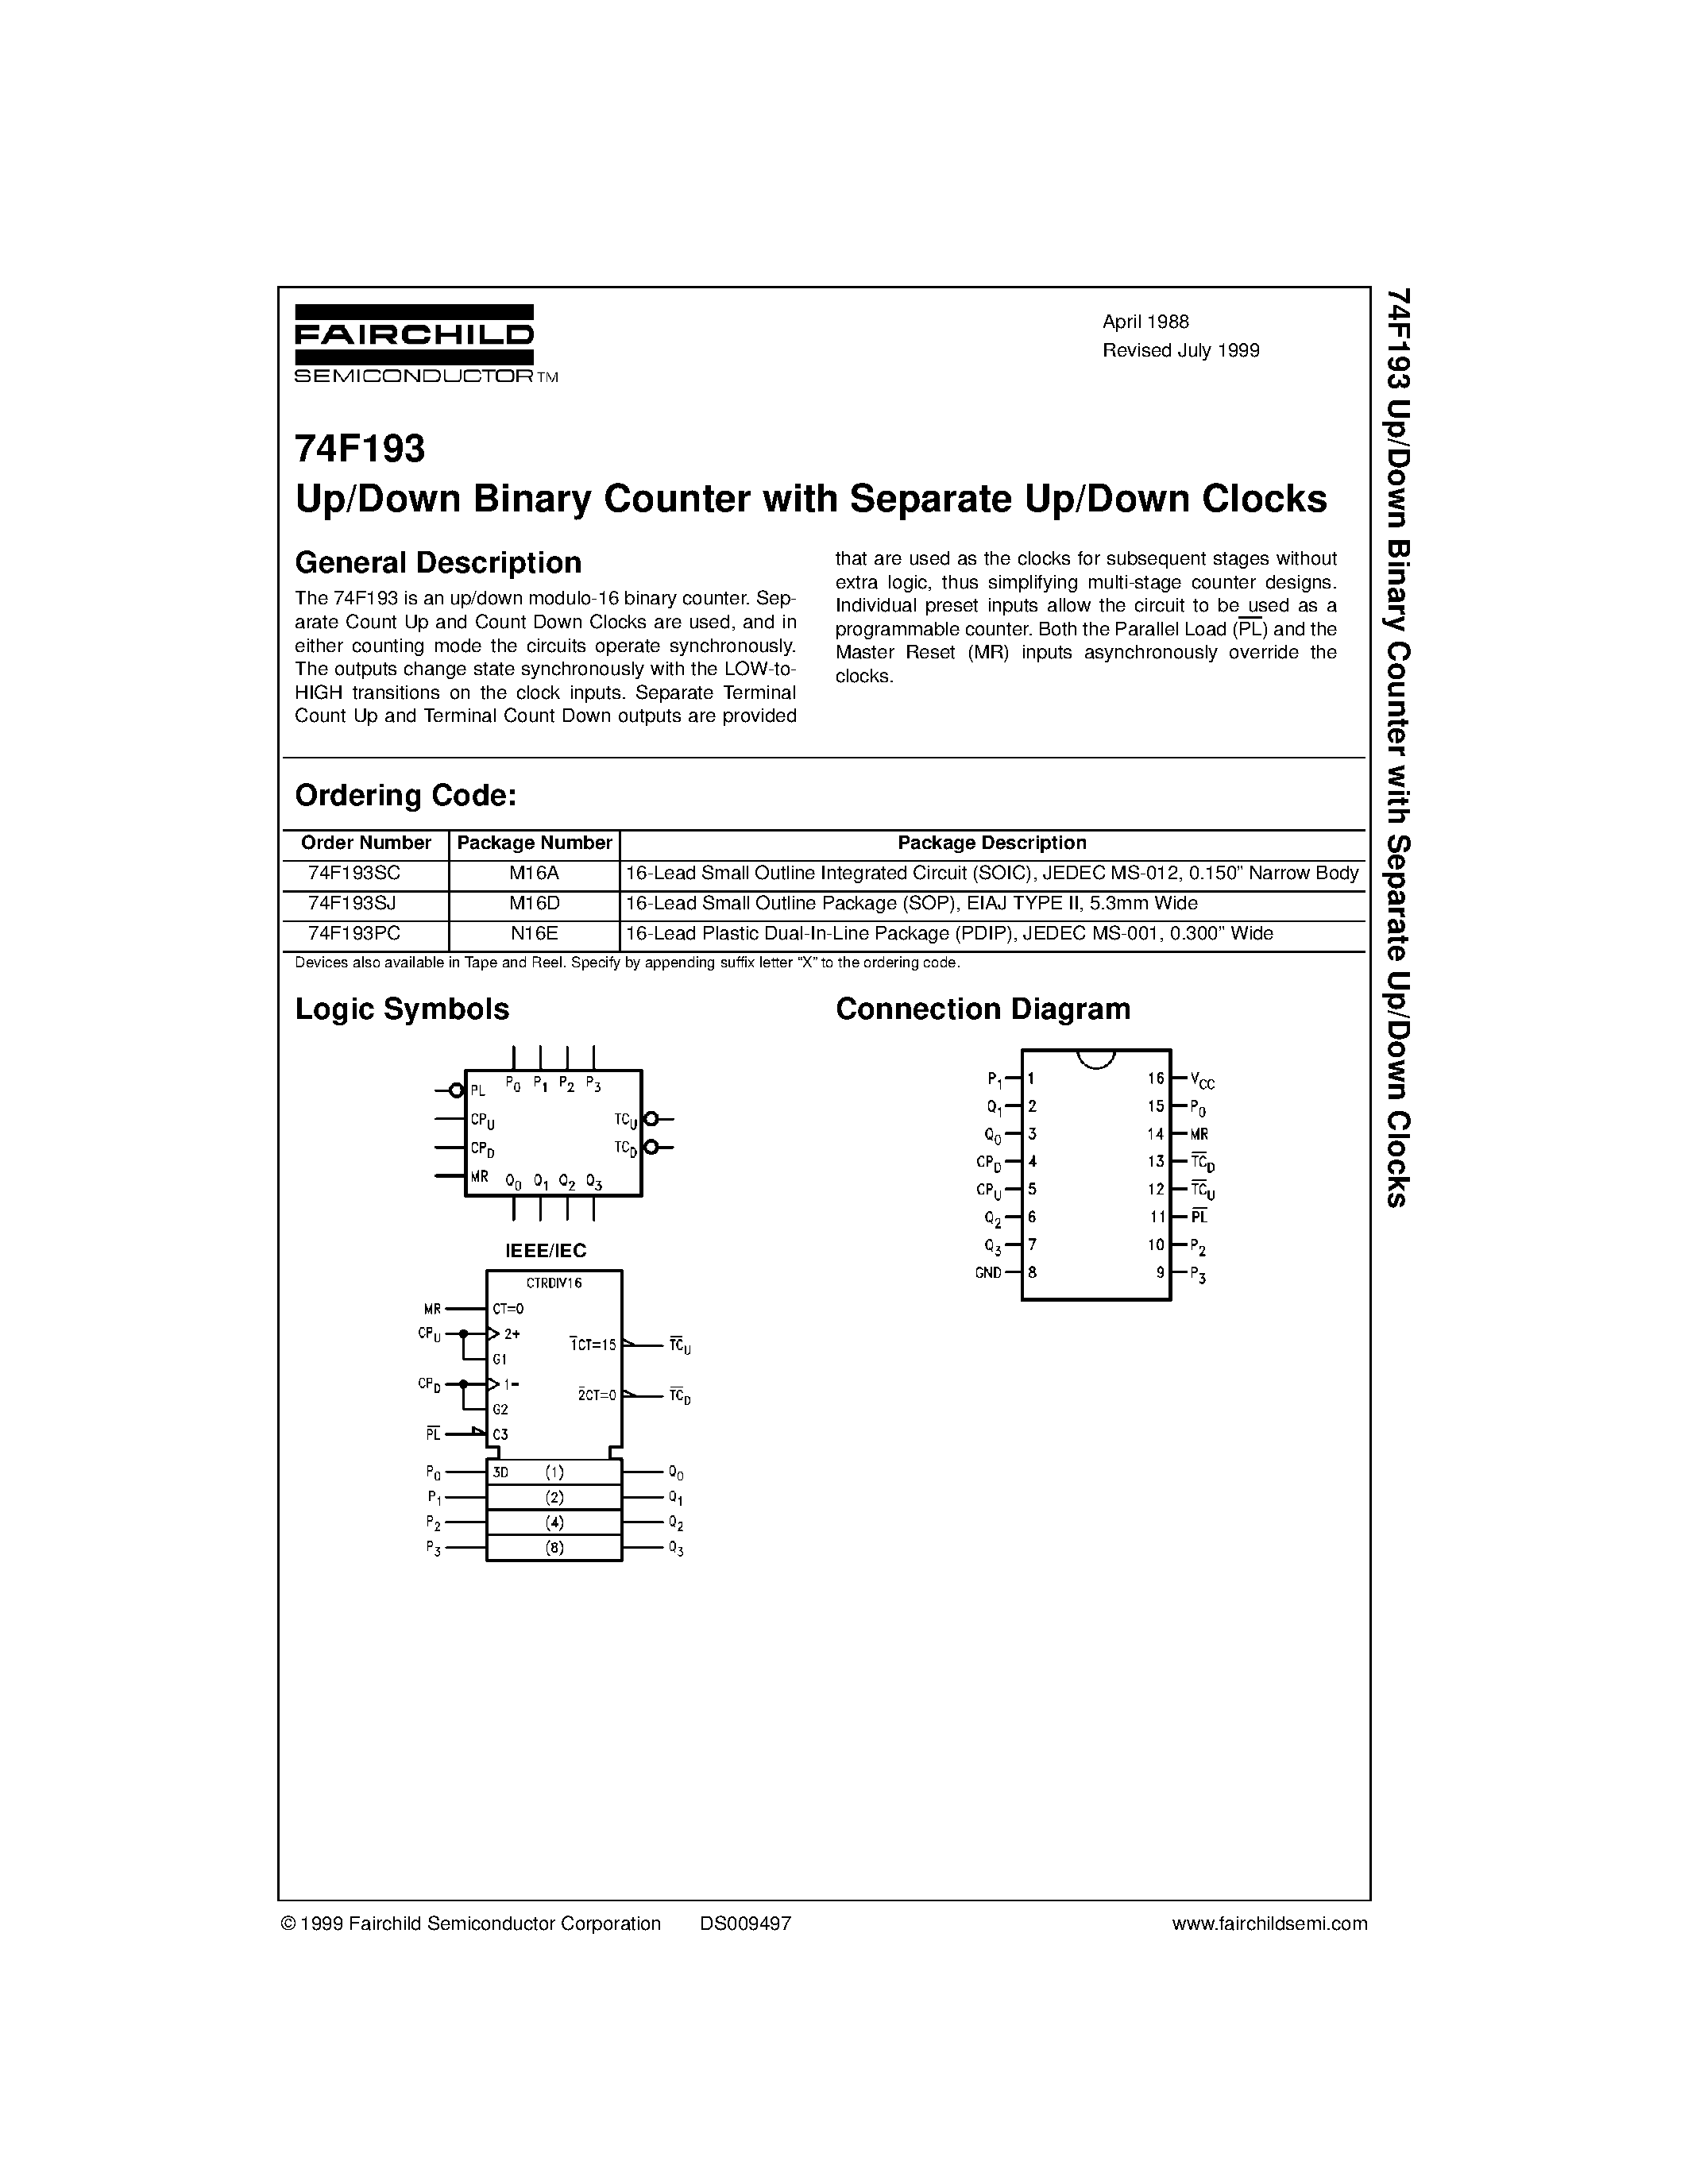 Datasheet 74F193SJ - Up/Down Binary Counter with Separate Up/Down Clocks page 1